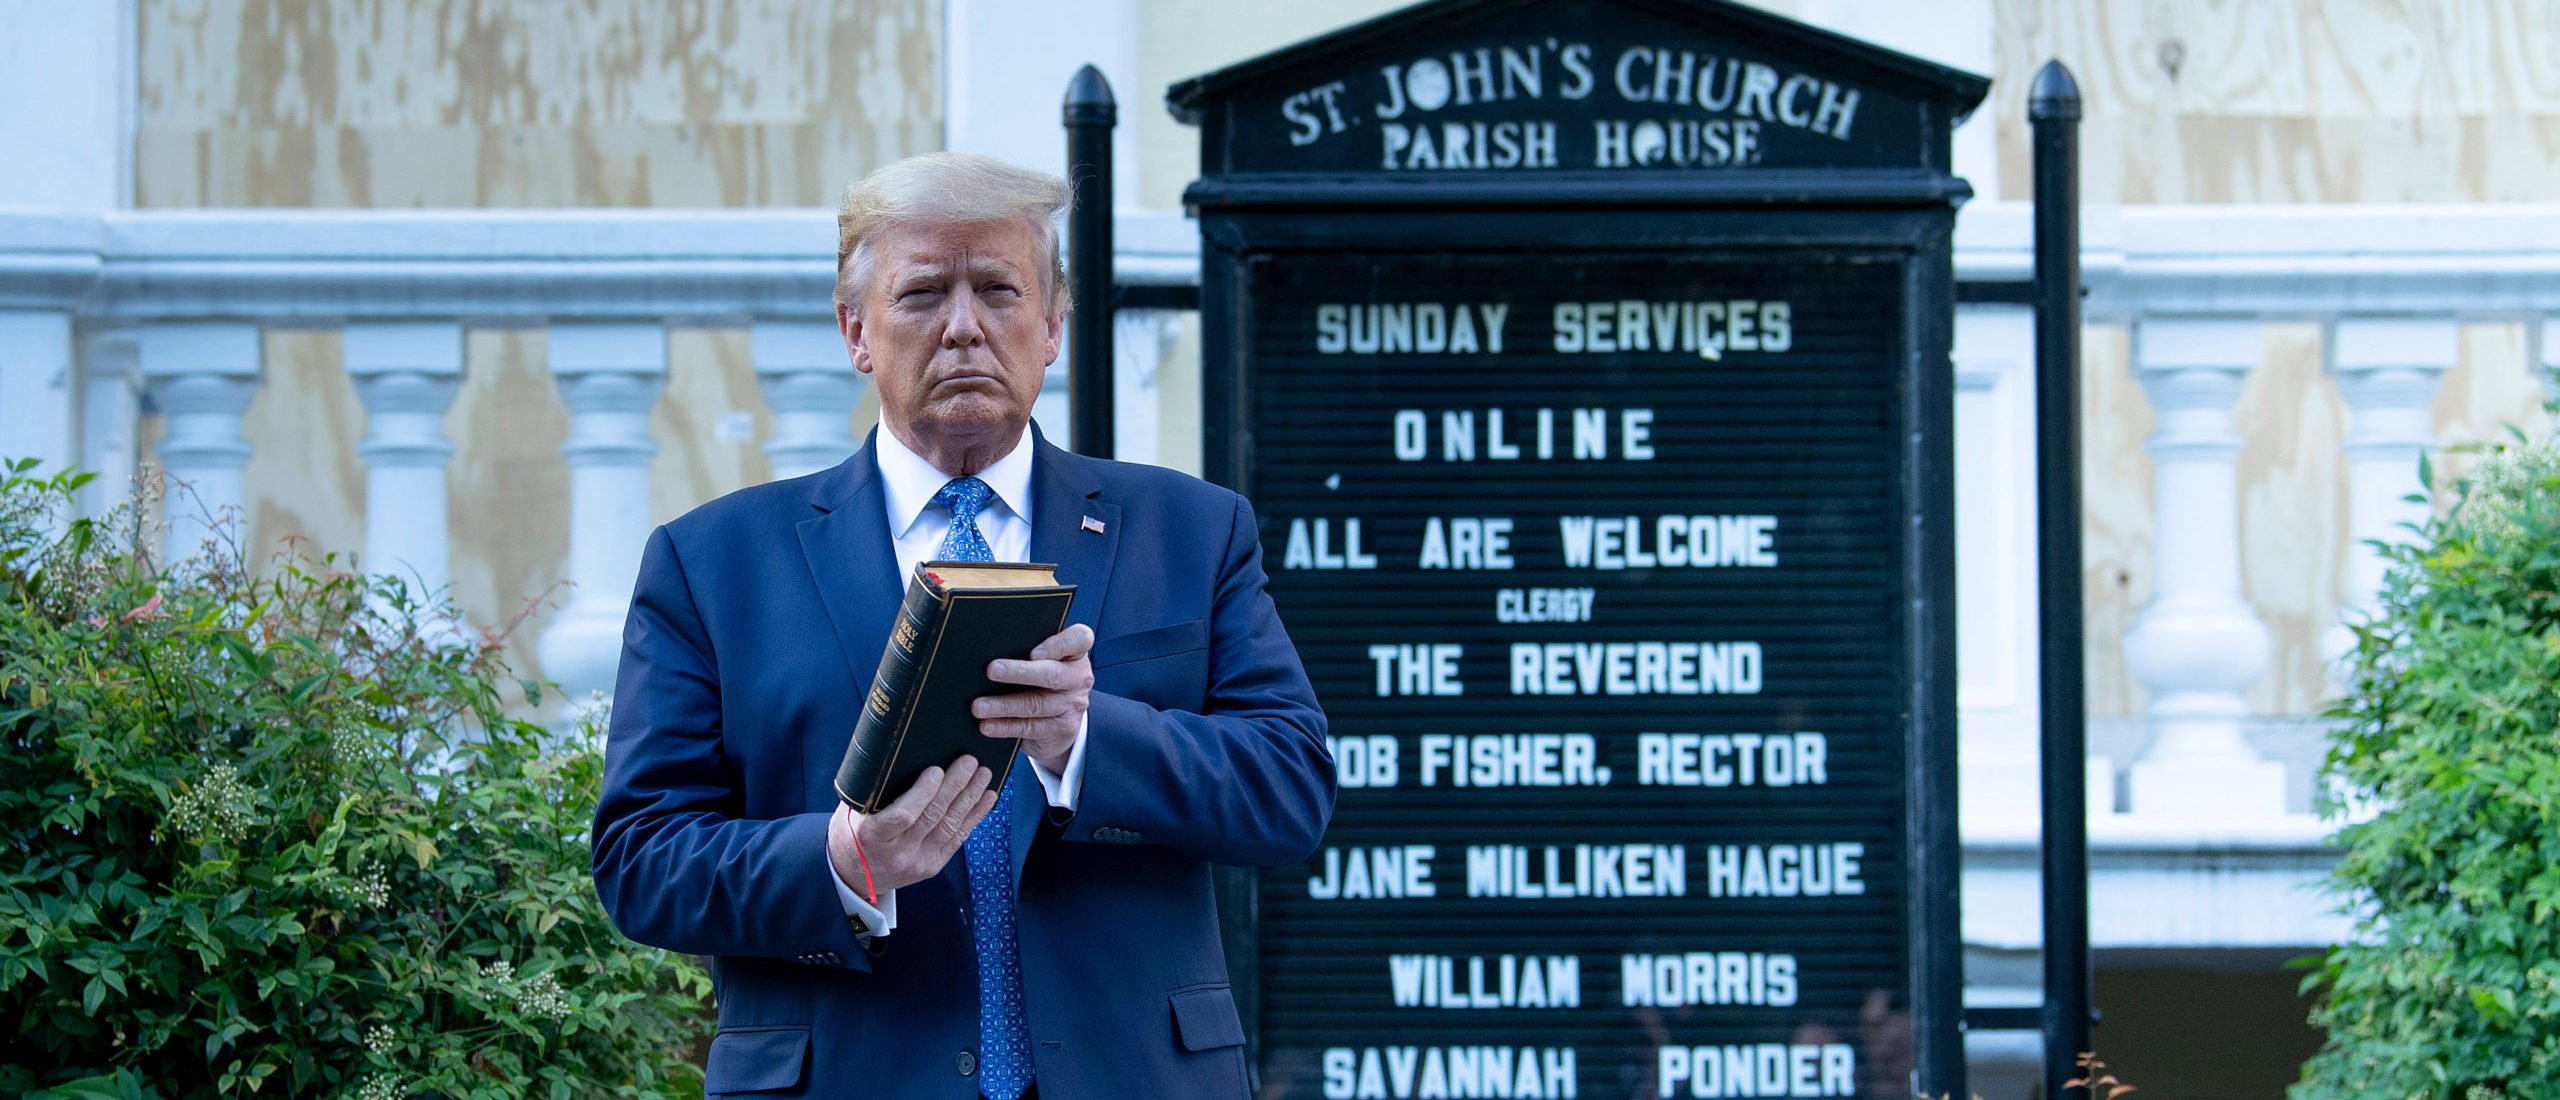 US President Donald Trump holds a Bible while visiting St. John's Church across from the White House after the area was cleared of people protesting the death of George Floyd June 1, 2020, in Washington, DC. - US President Donald Trump was due to make a televised address to the nation on Monday after days of anti-racism protests against police brutality that have erupted into violence. The White House announced that the president would make remarks imminently after he has been criticized for not publicly addressing in the crisis in recent days. (Photo by Brendan Smialowski / AFP) (Photo by BRENDAN SMIALOWSKI/AFP via Getty Images)